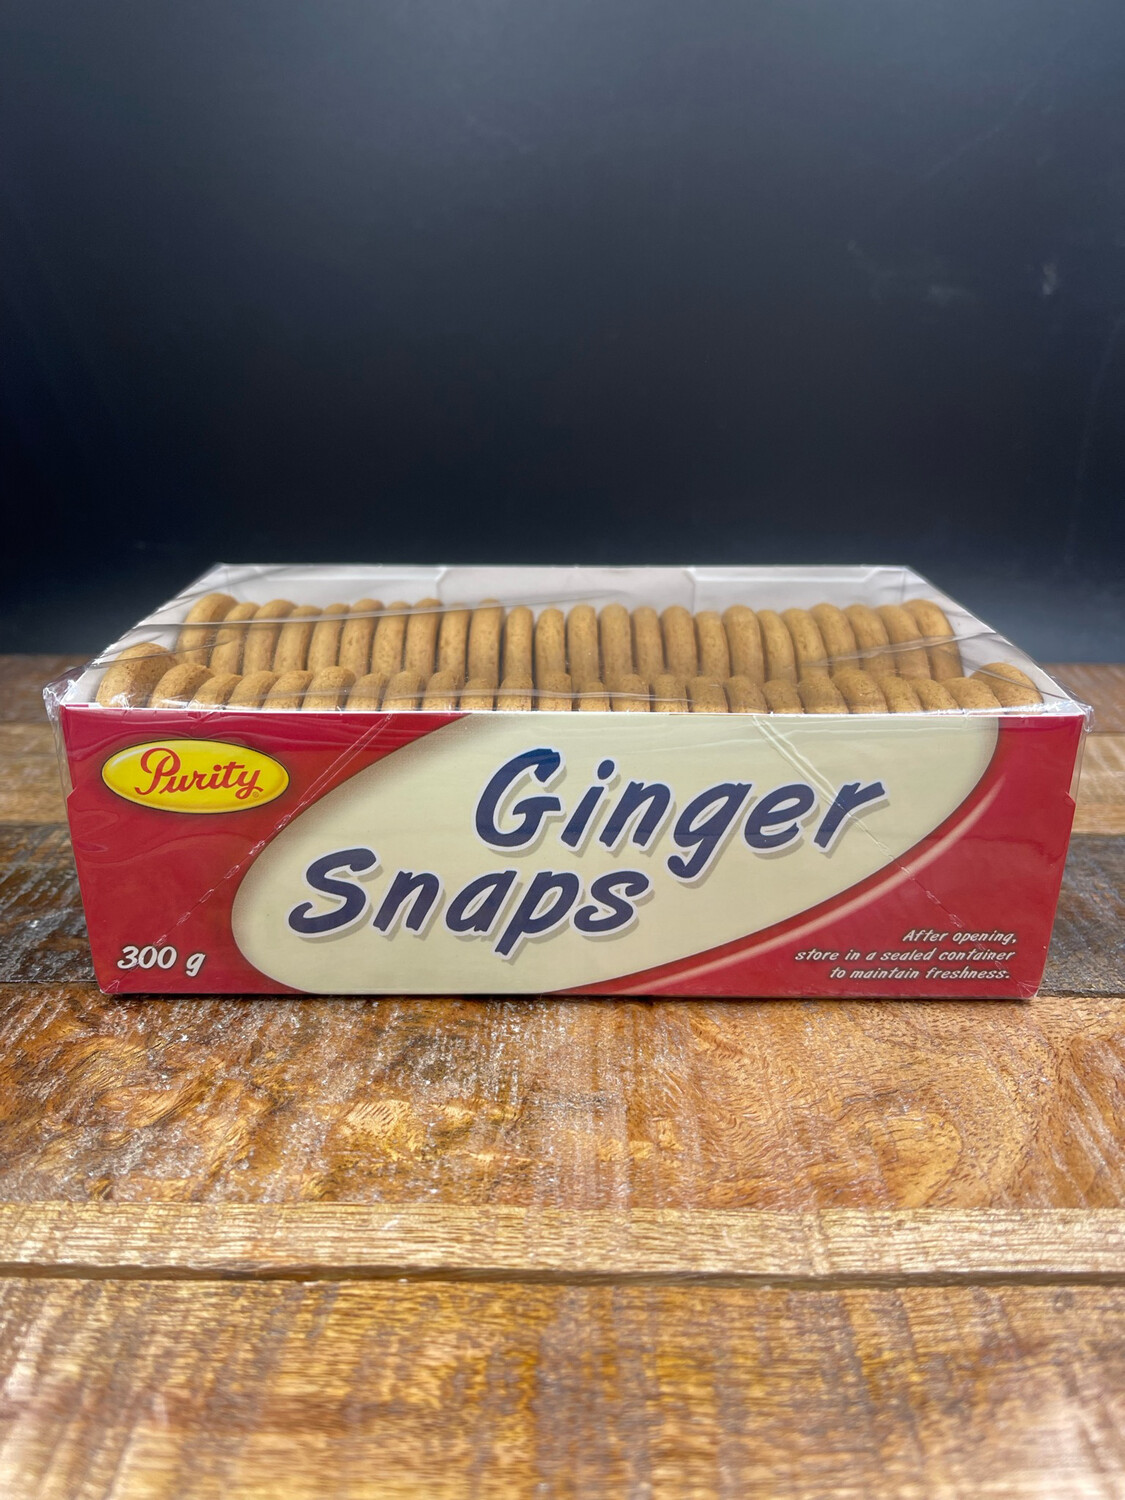 Purity Ginger Snaps 300g